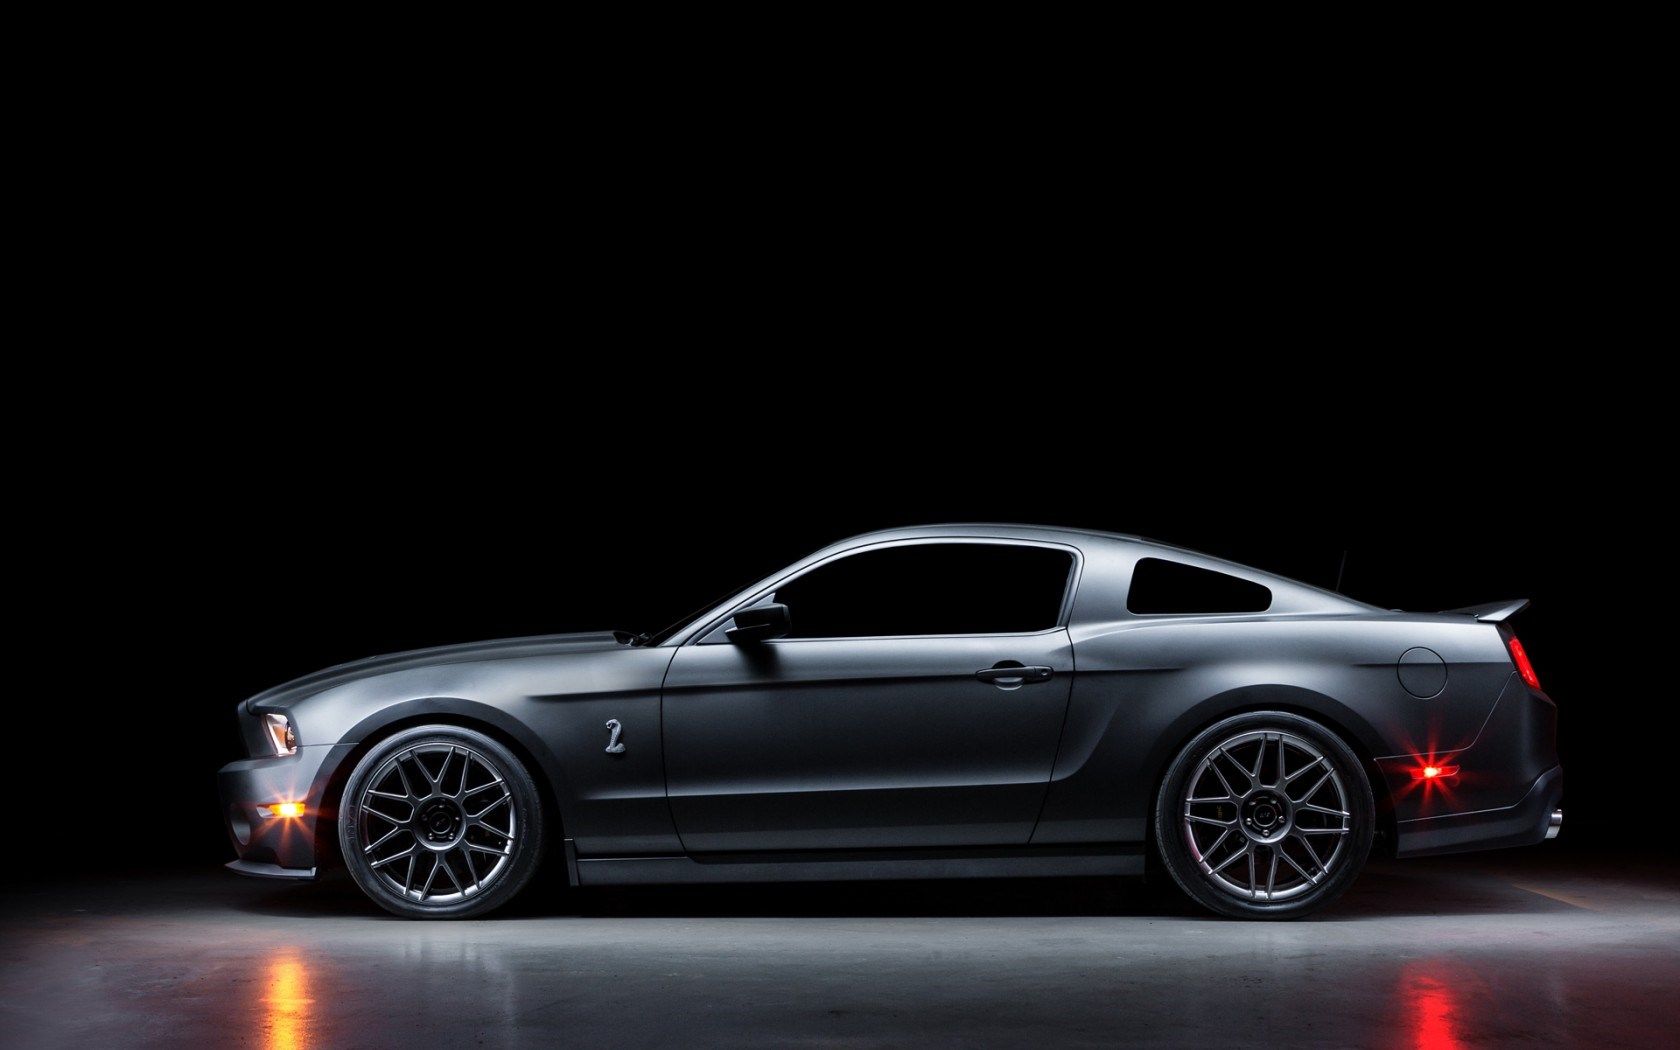 HD wallpaper, Gt500, Ford, Mustang, Car, Profile, Shelby